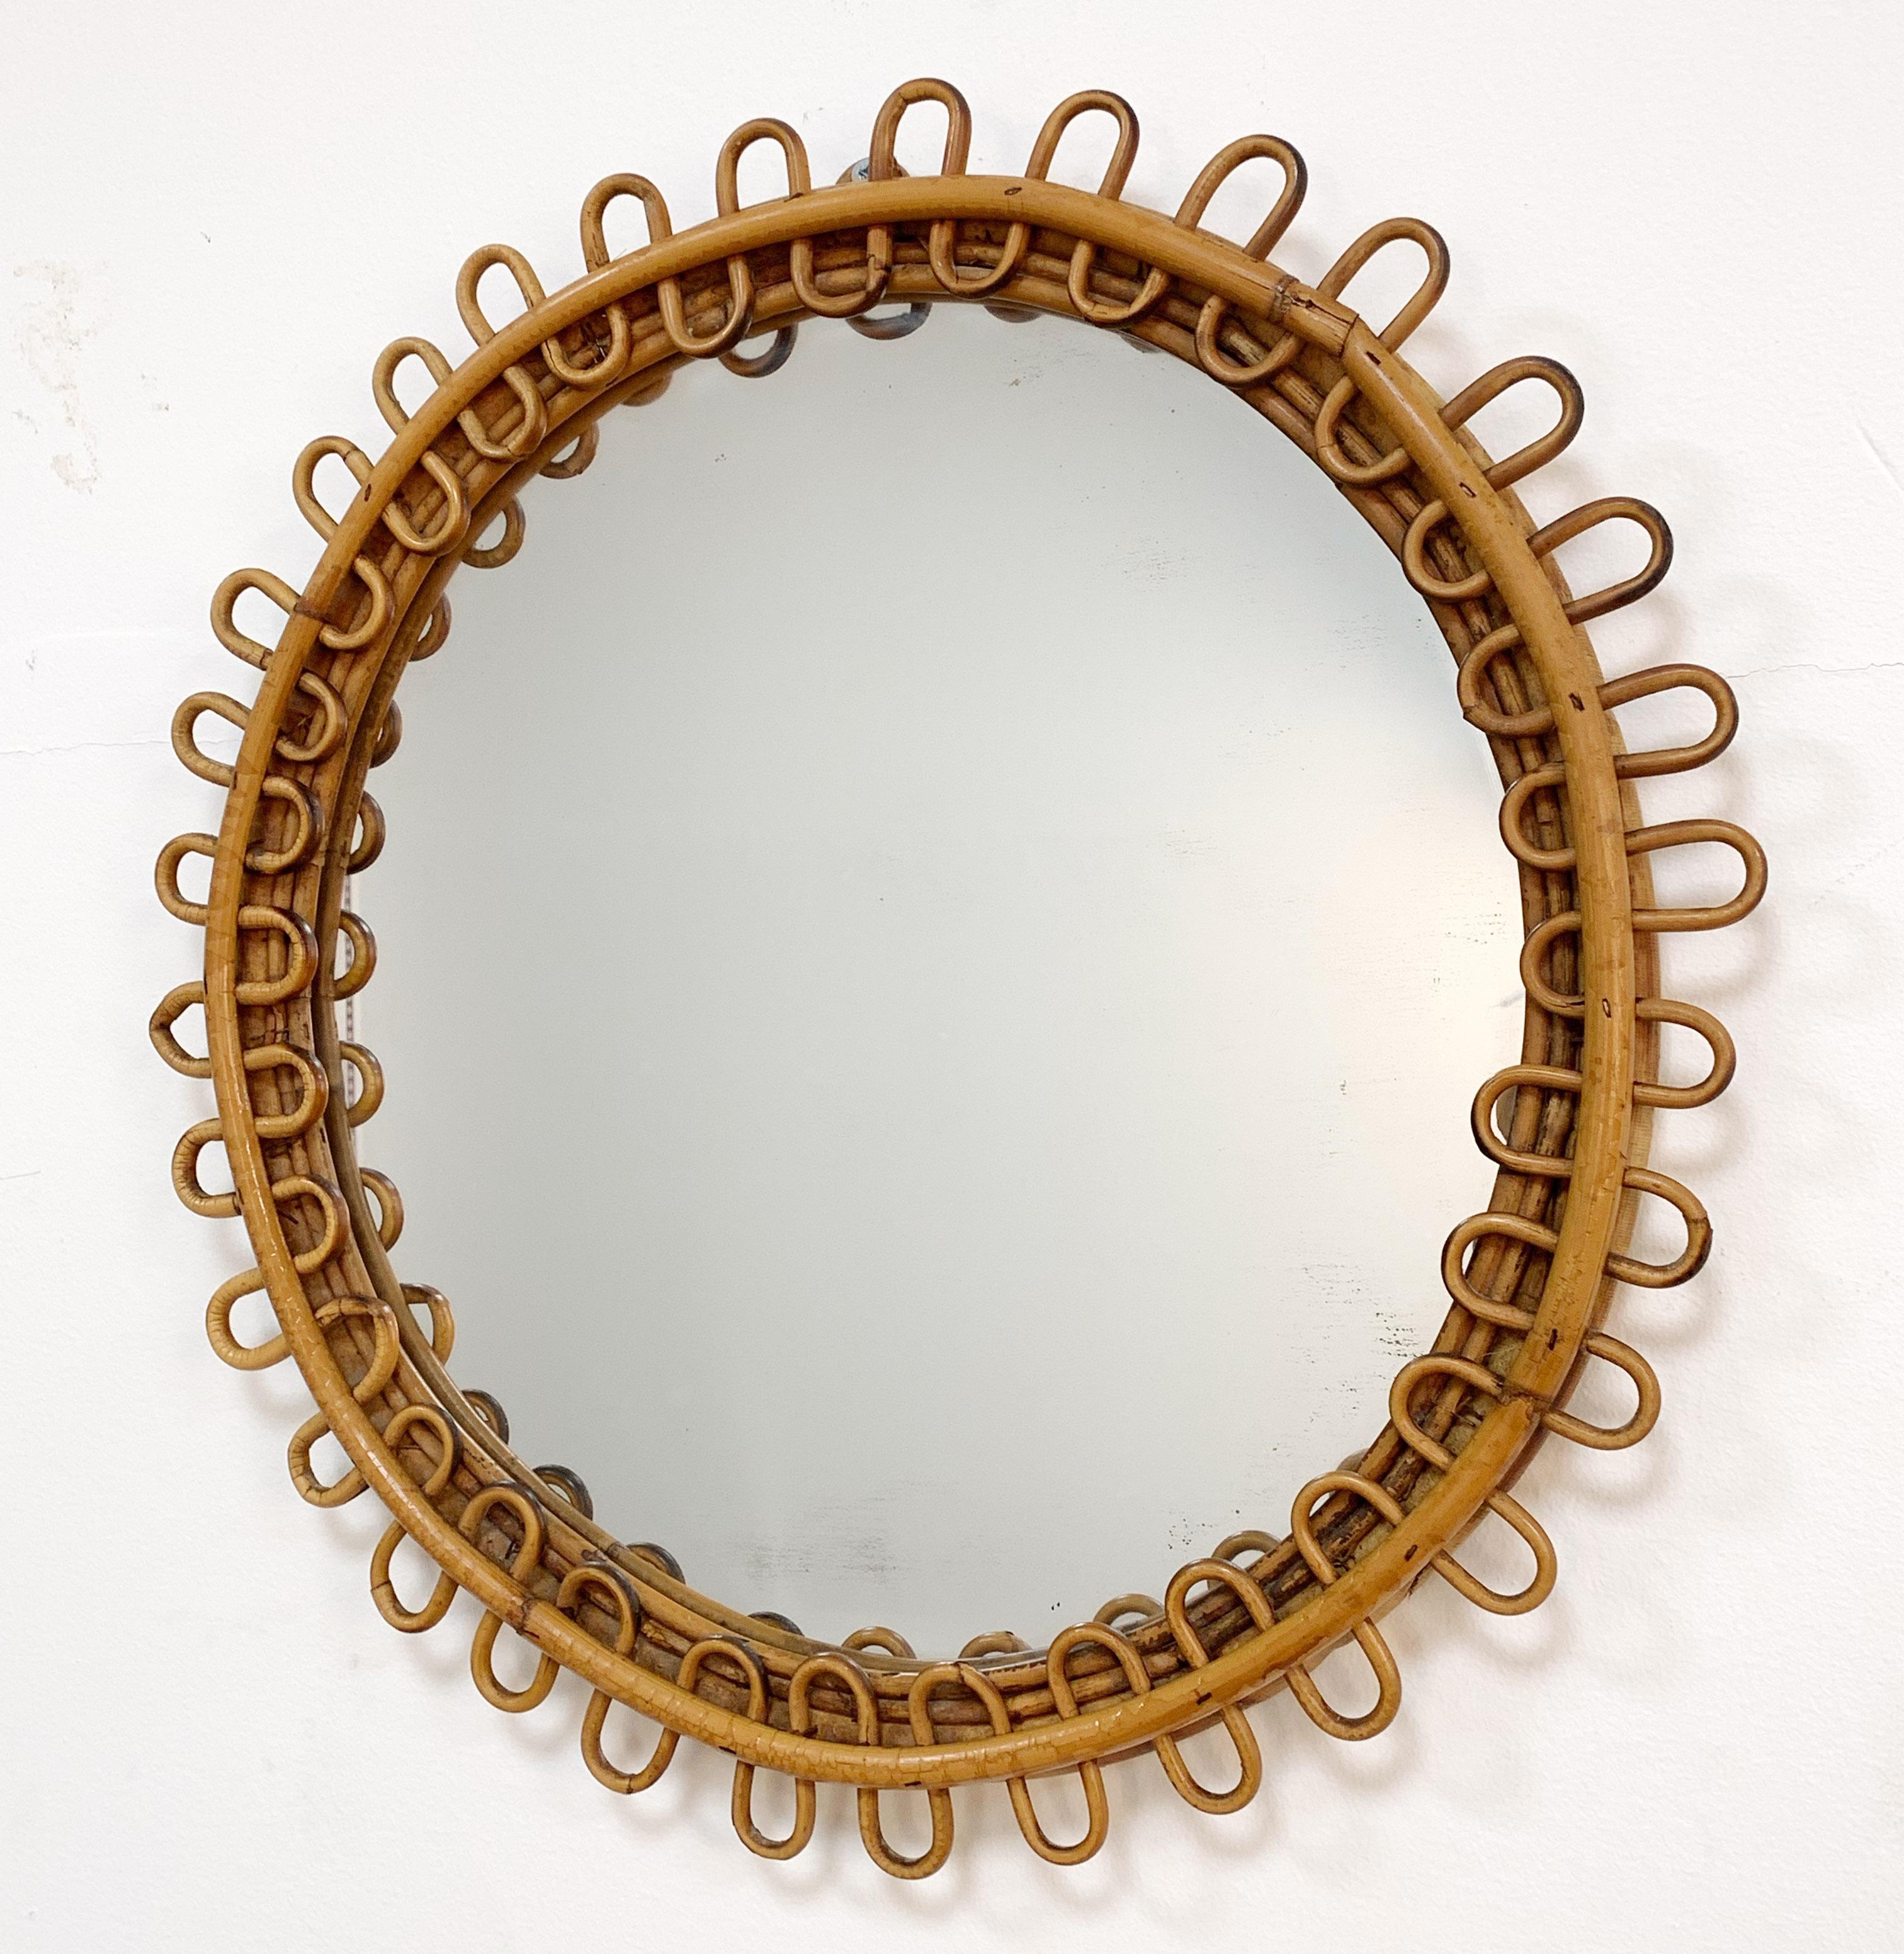 Wonderful round Italian riviera mirror with curved rattan beams and bamboo frame. 

This mirror is attributed to Franco Albini ad was produced in Italy, during 1950s. 

It has a diameter of 48 cm and with its light surface, it will add deepness